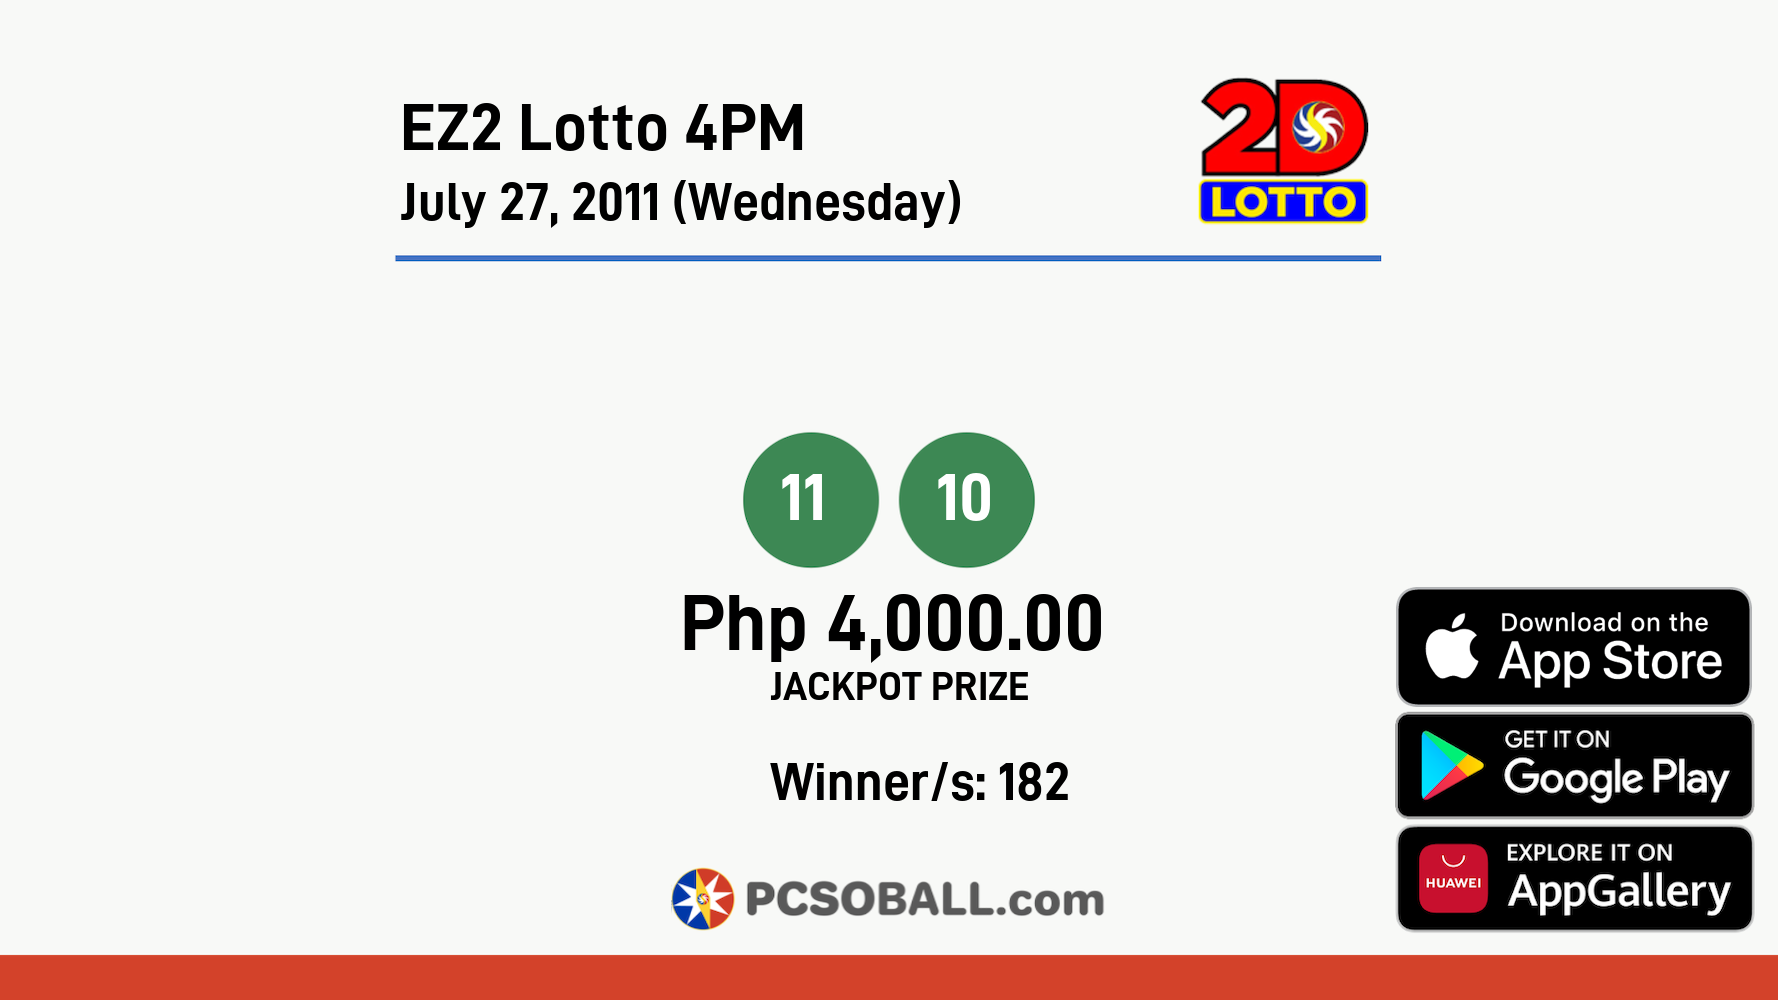 EZ2 Lotto 4PM July 27, 2011 (Wednesday) Result